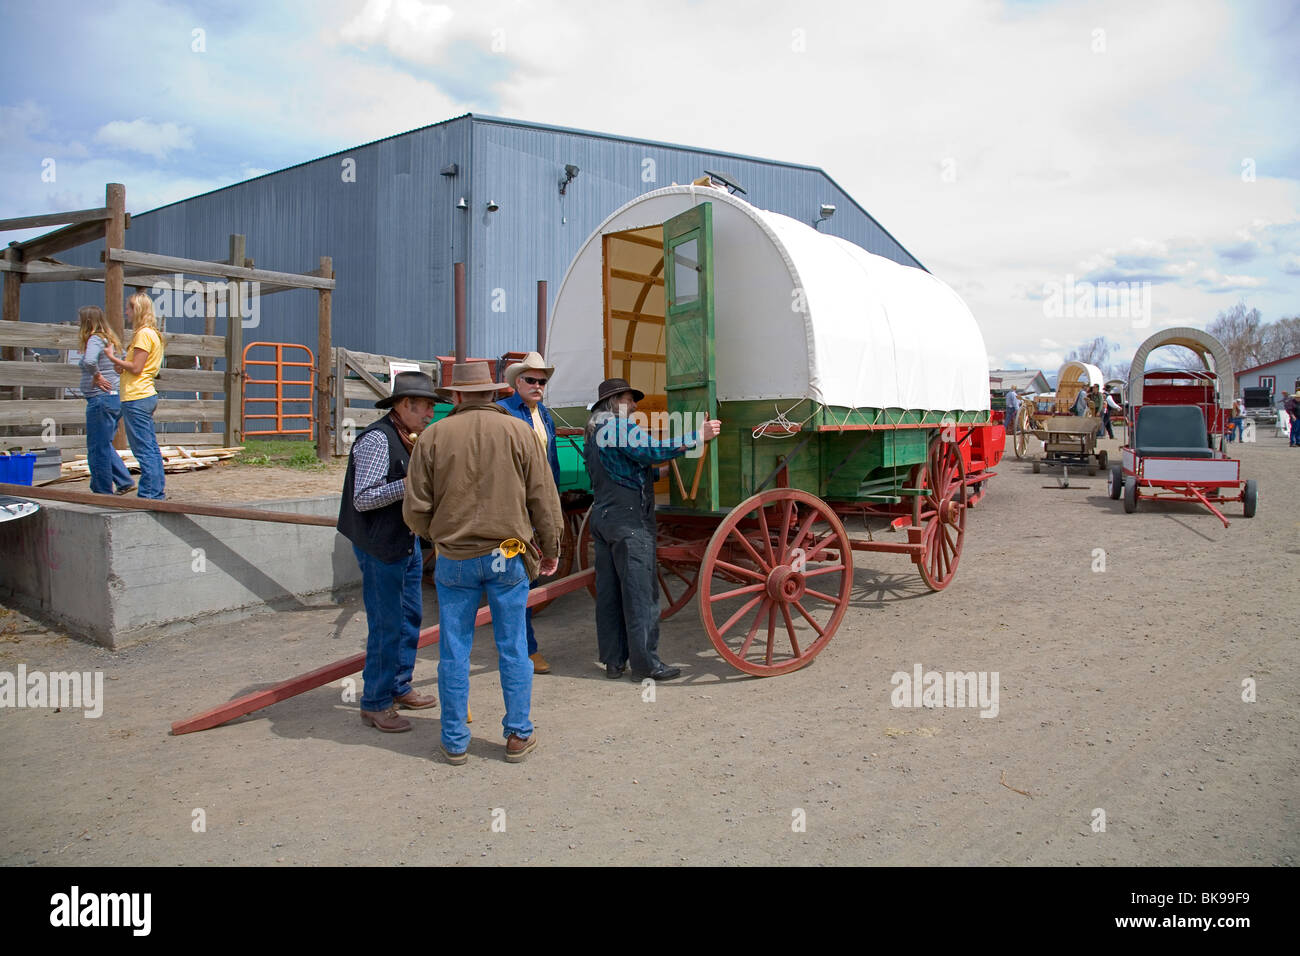 Elderly cowboys and visitors examine a Basque sheepherder's wagon at a county fair in Madres, Oregon Stock Photo